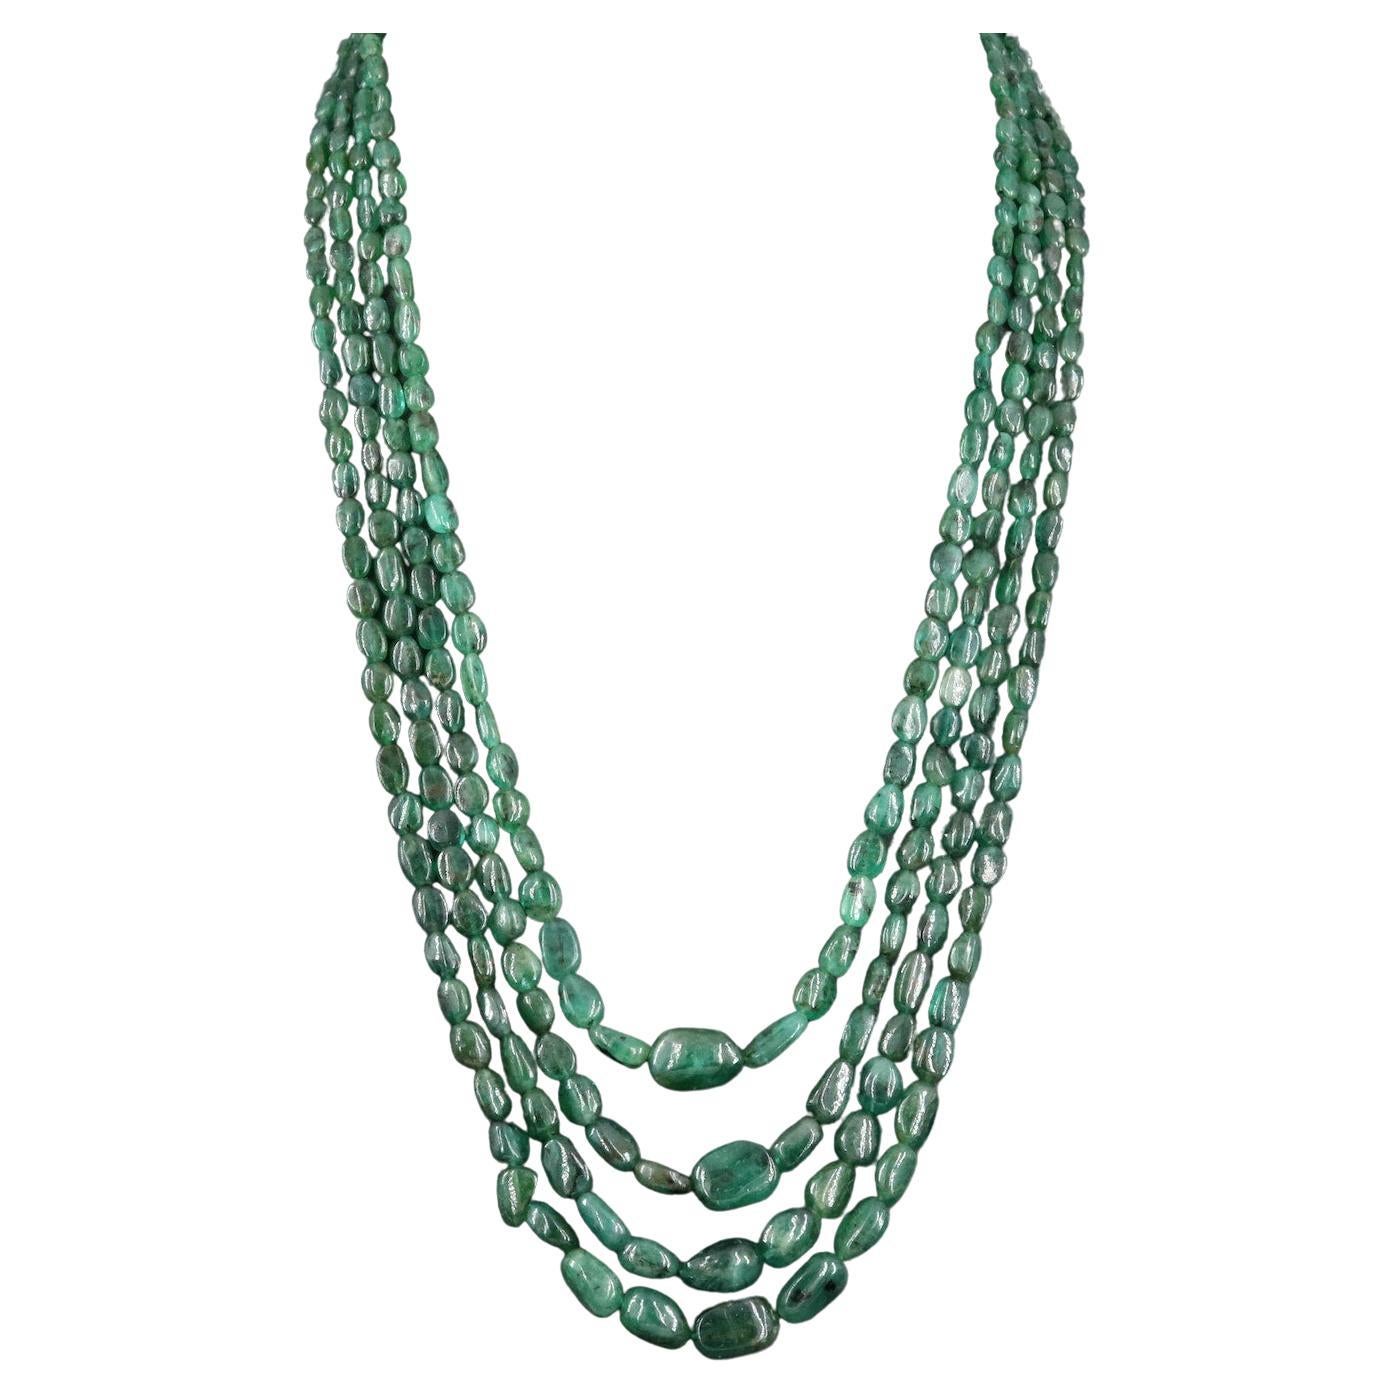 450 Carats of Earth Mined Emeralds Set in a 4 Strand Necklace For Sale